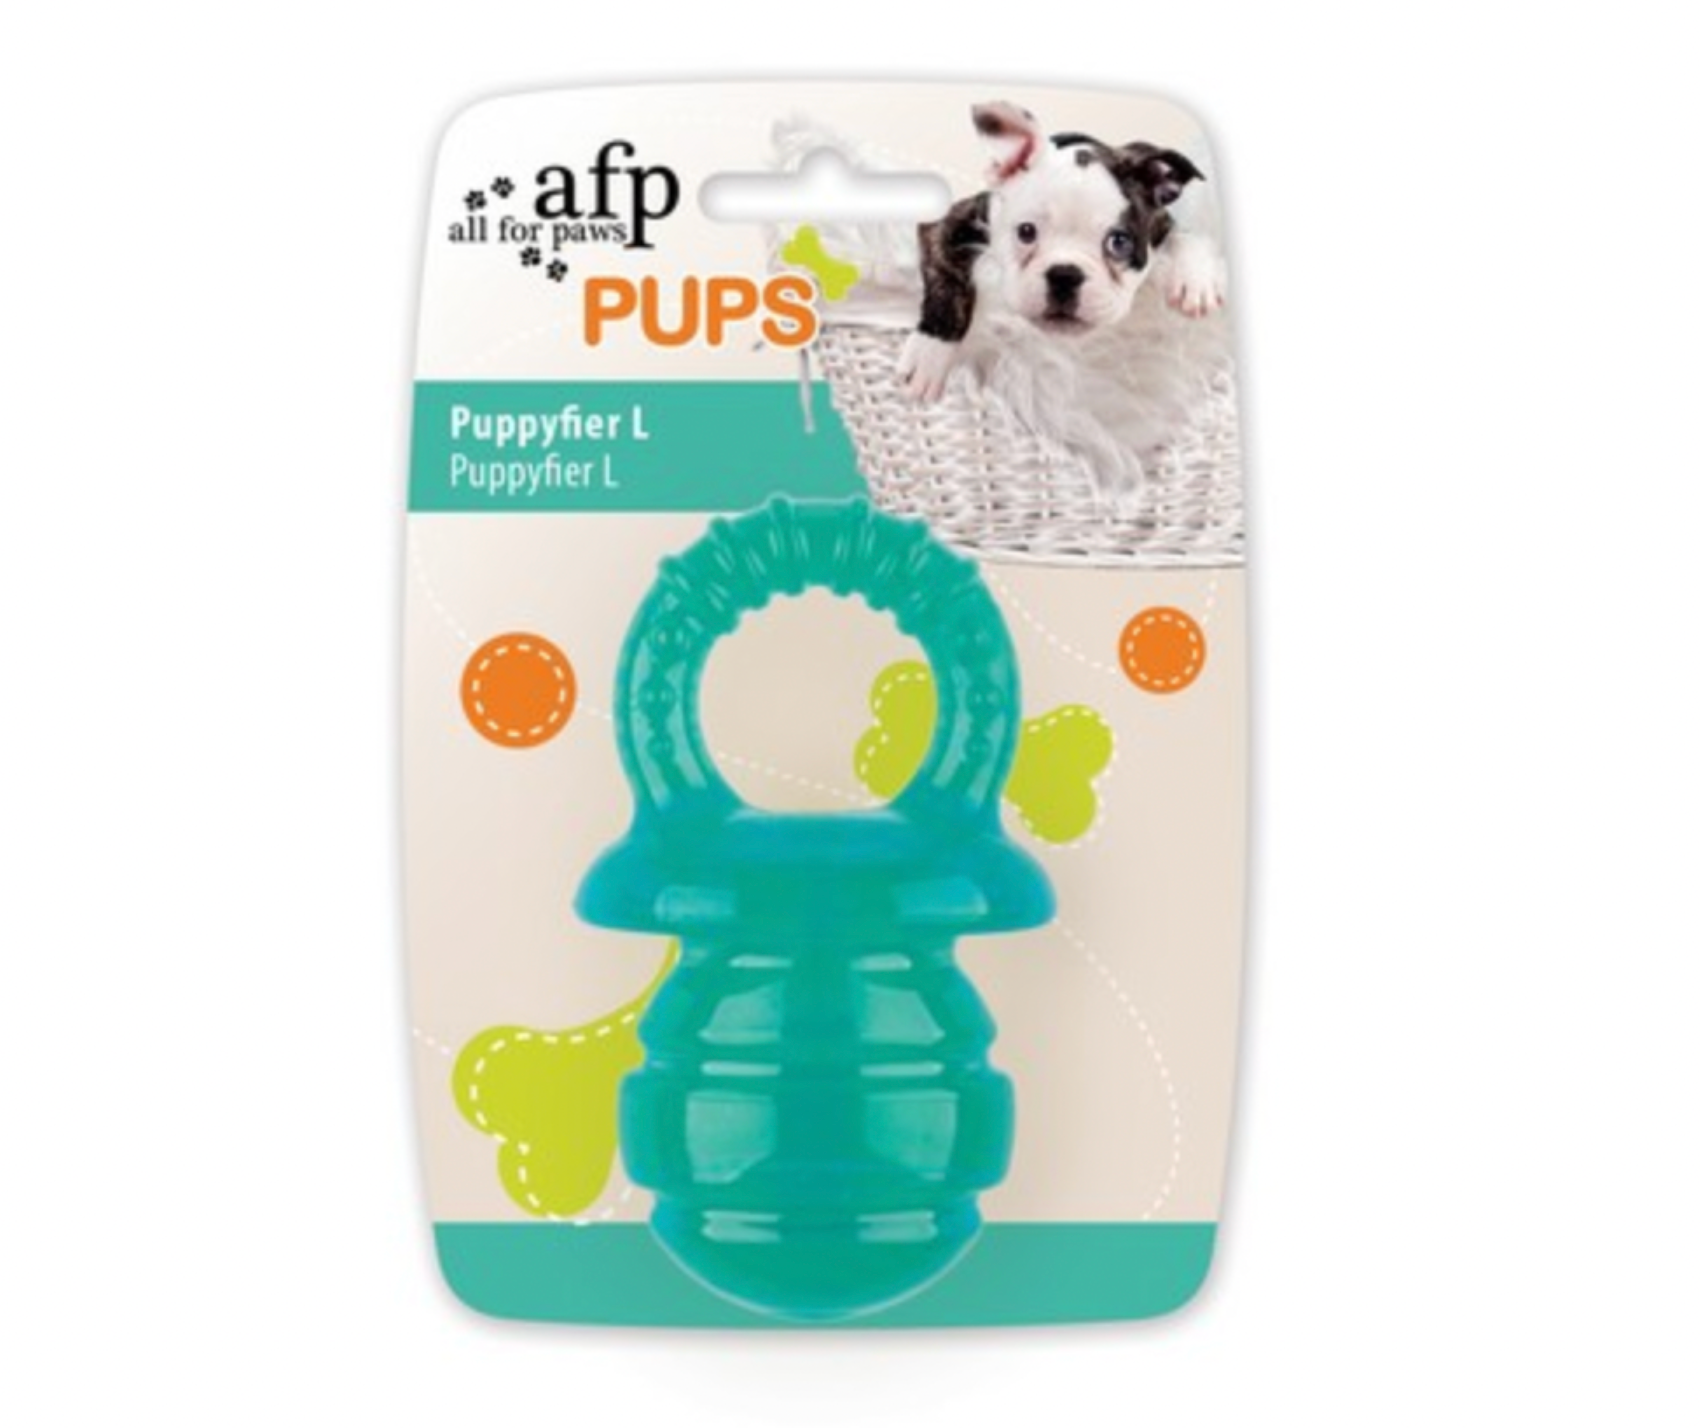 All For Paws Pups Puppyfier Turquoise (Large)